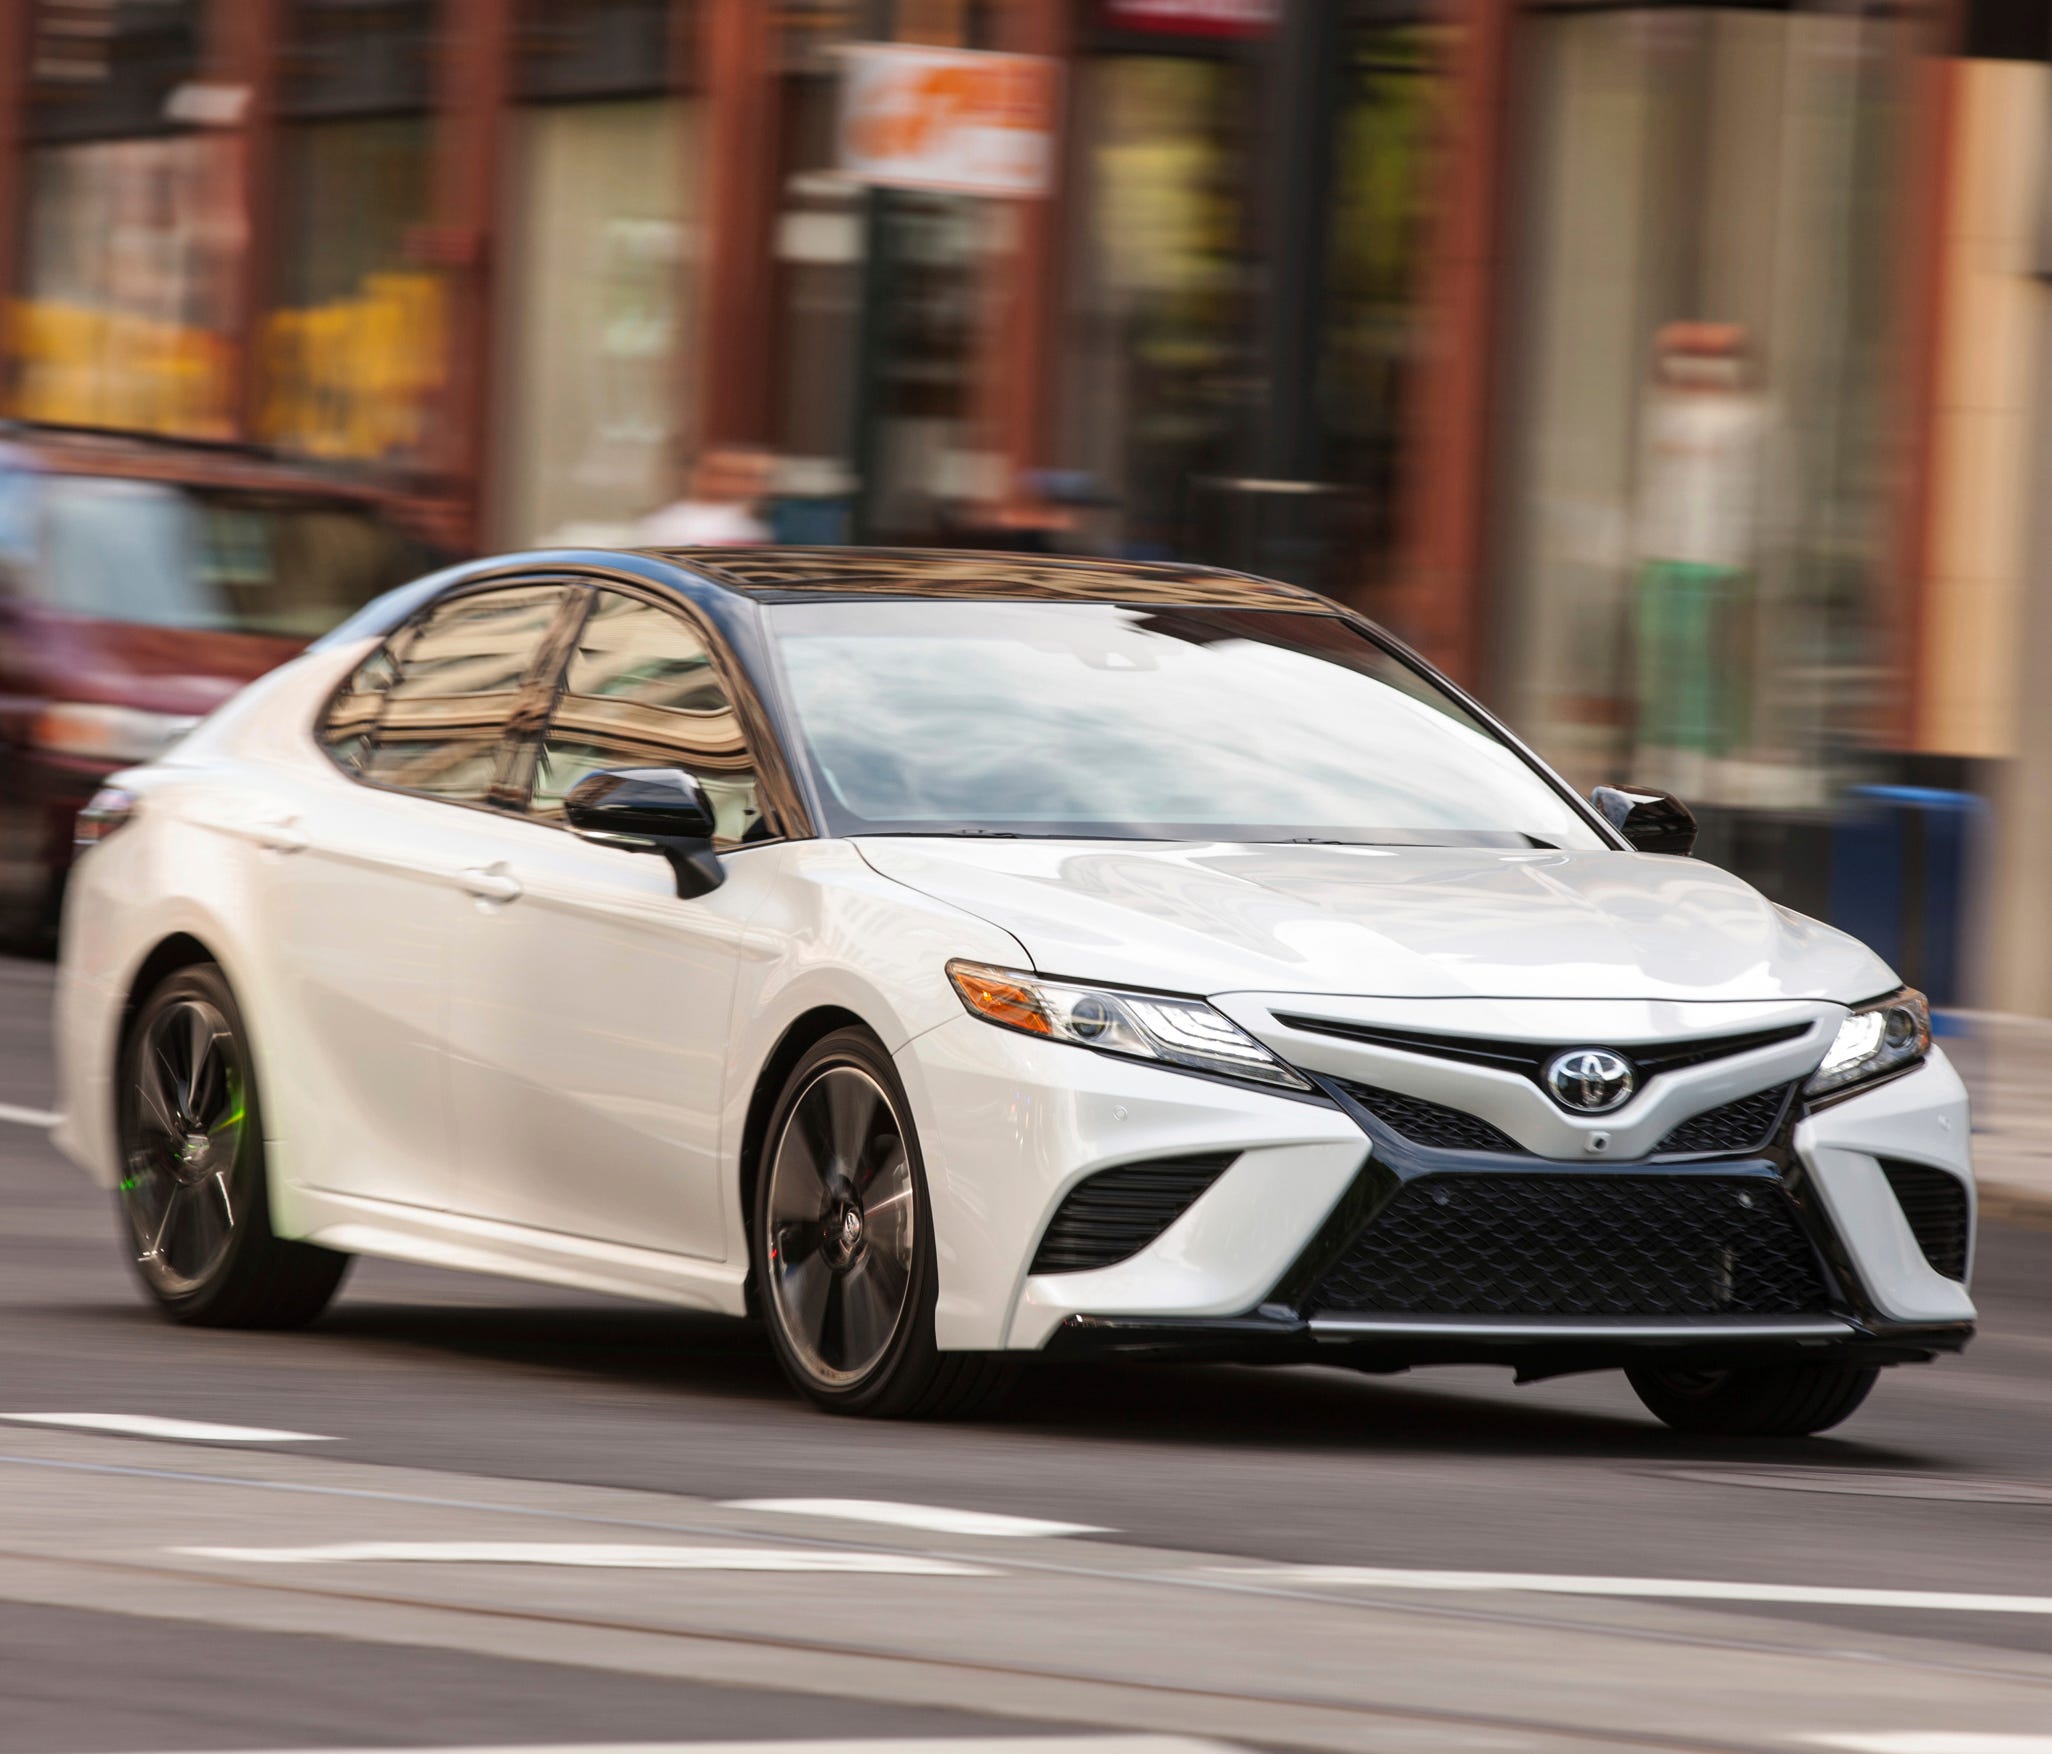 This photo provided by Toyota shows the 2018 Toyota Camry, one of the most popular midsize sedans sold in America. It's been completely redesigned for 2018, with better handling and improved fuel economy without any compromises to usability or utilit